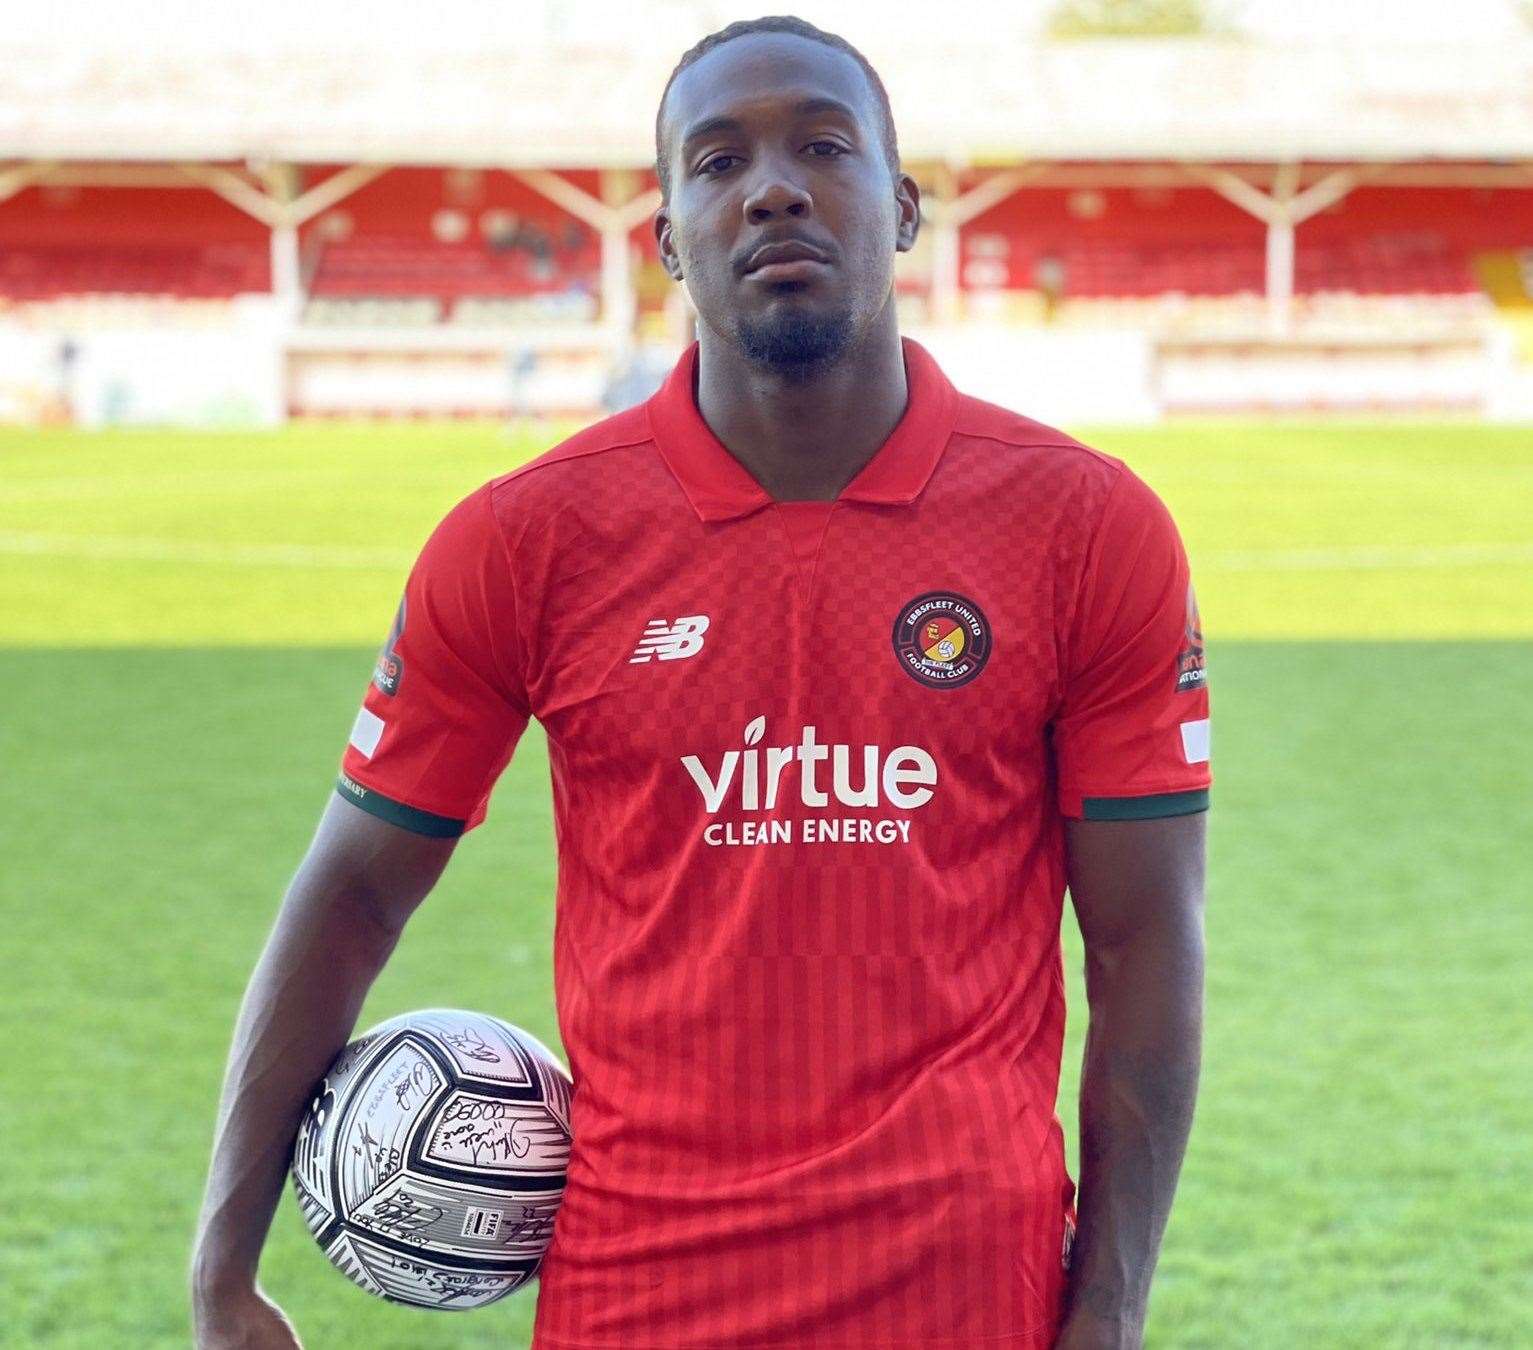 Ebbsfleet striker Dominic Poleon with the matchball after his hat-trick on Saturday. Picture: Twitter/Dominic Poleon (50252787)